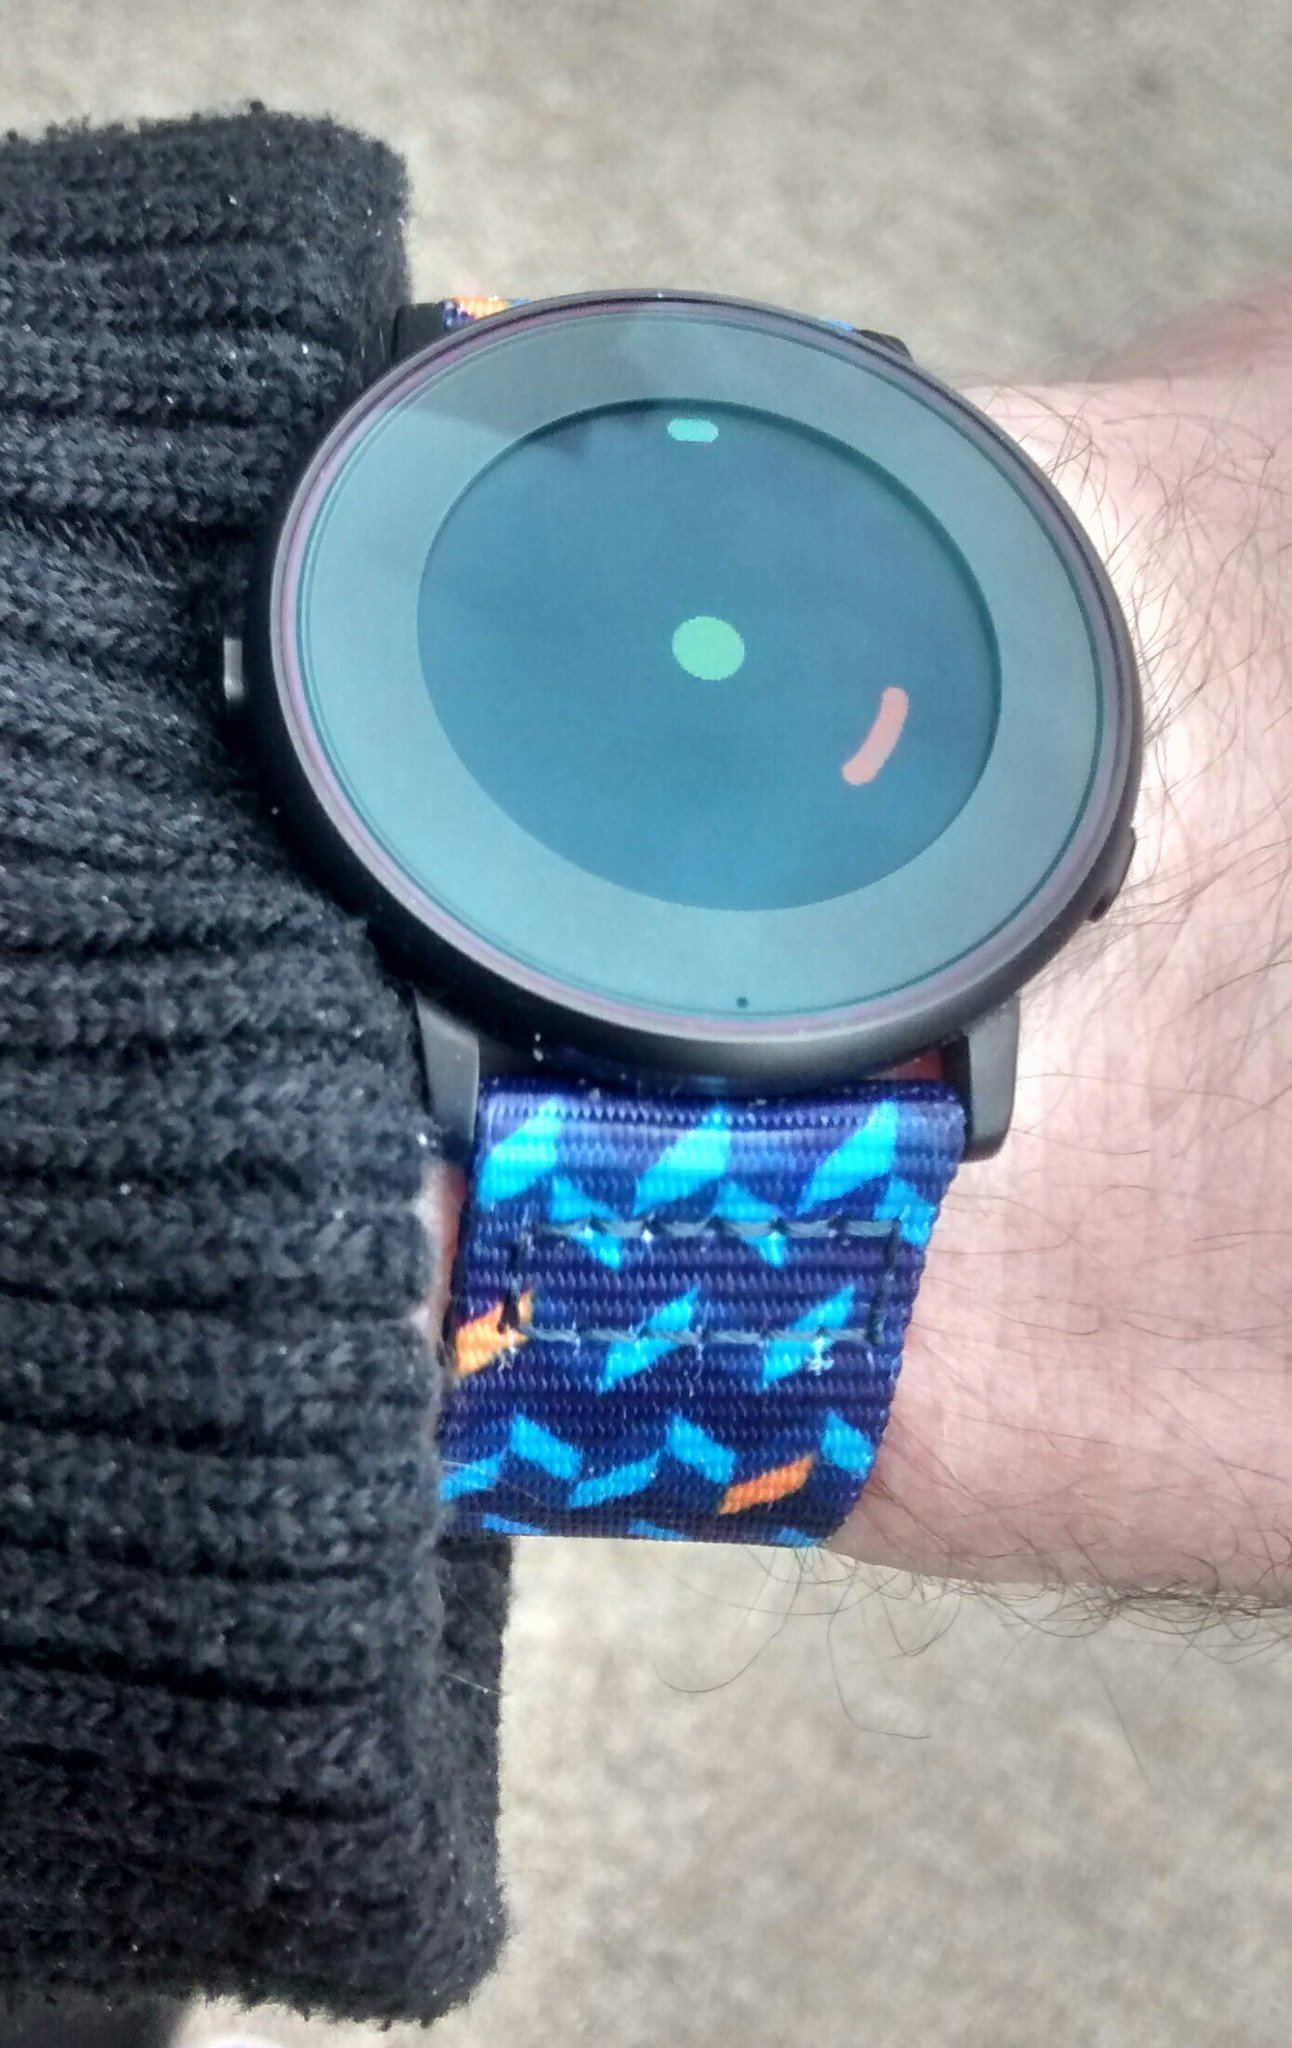 Pebble Time Round with Ocean Chevron strap by #varioclub member Nev Rawlins